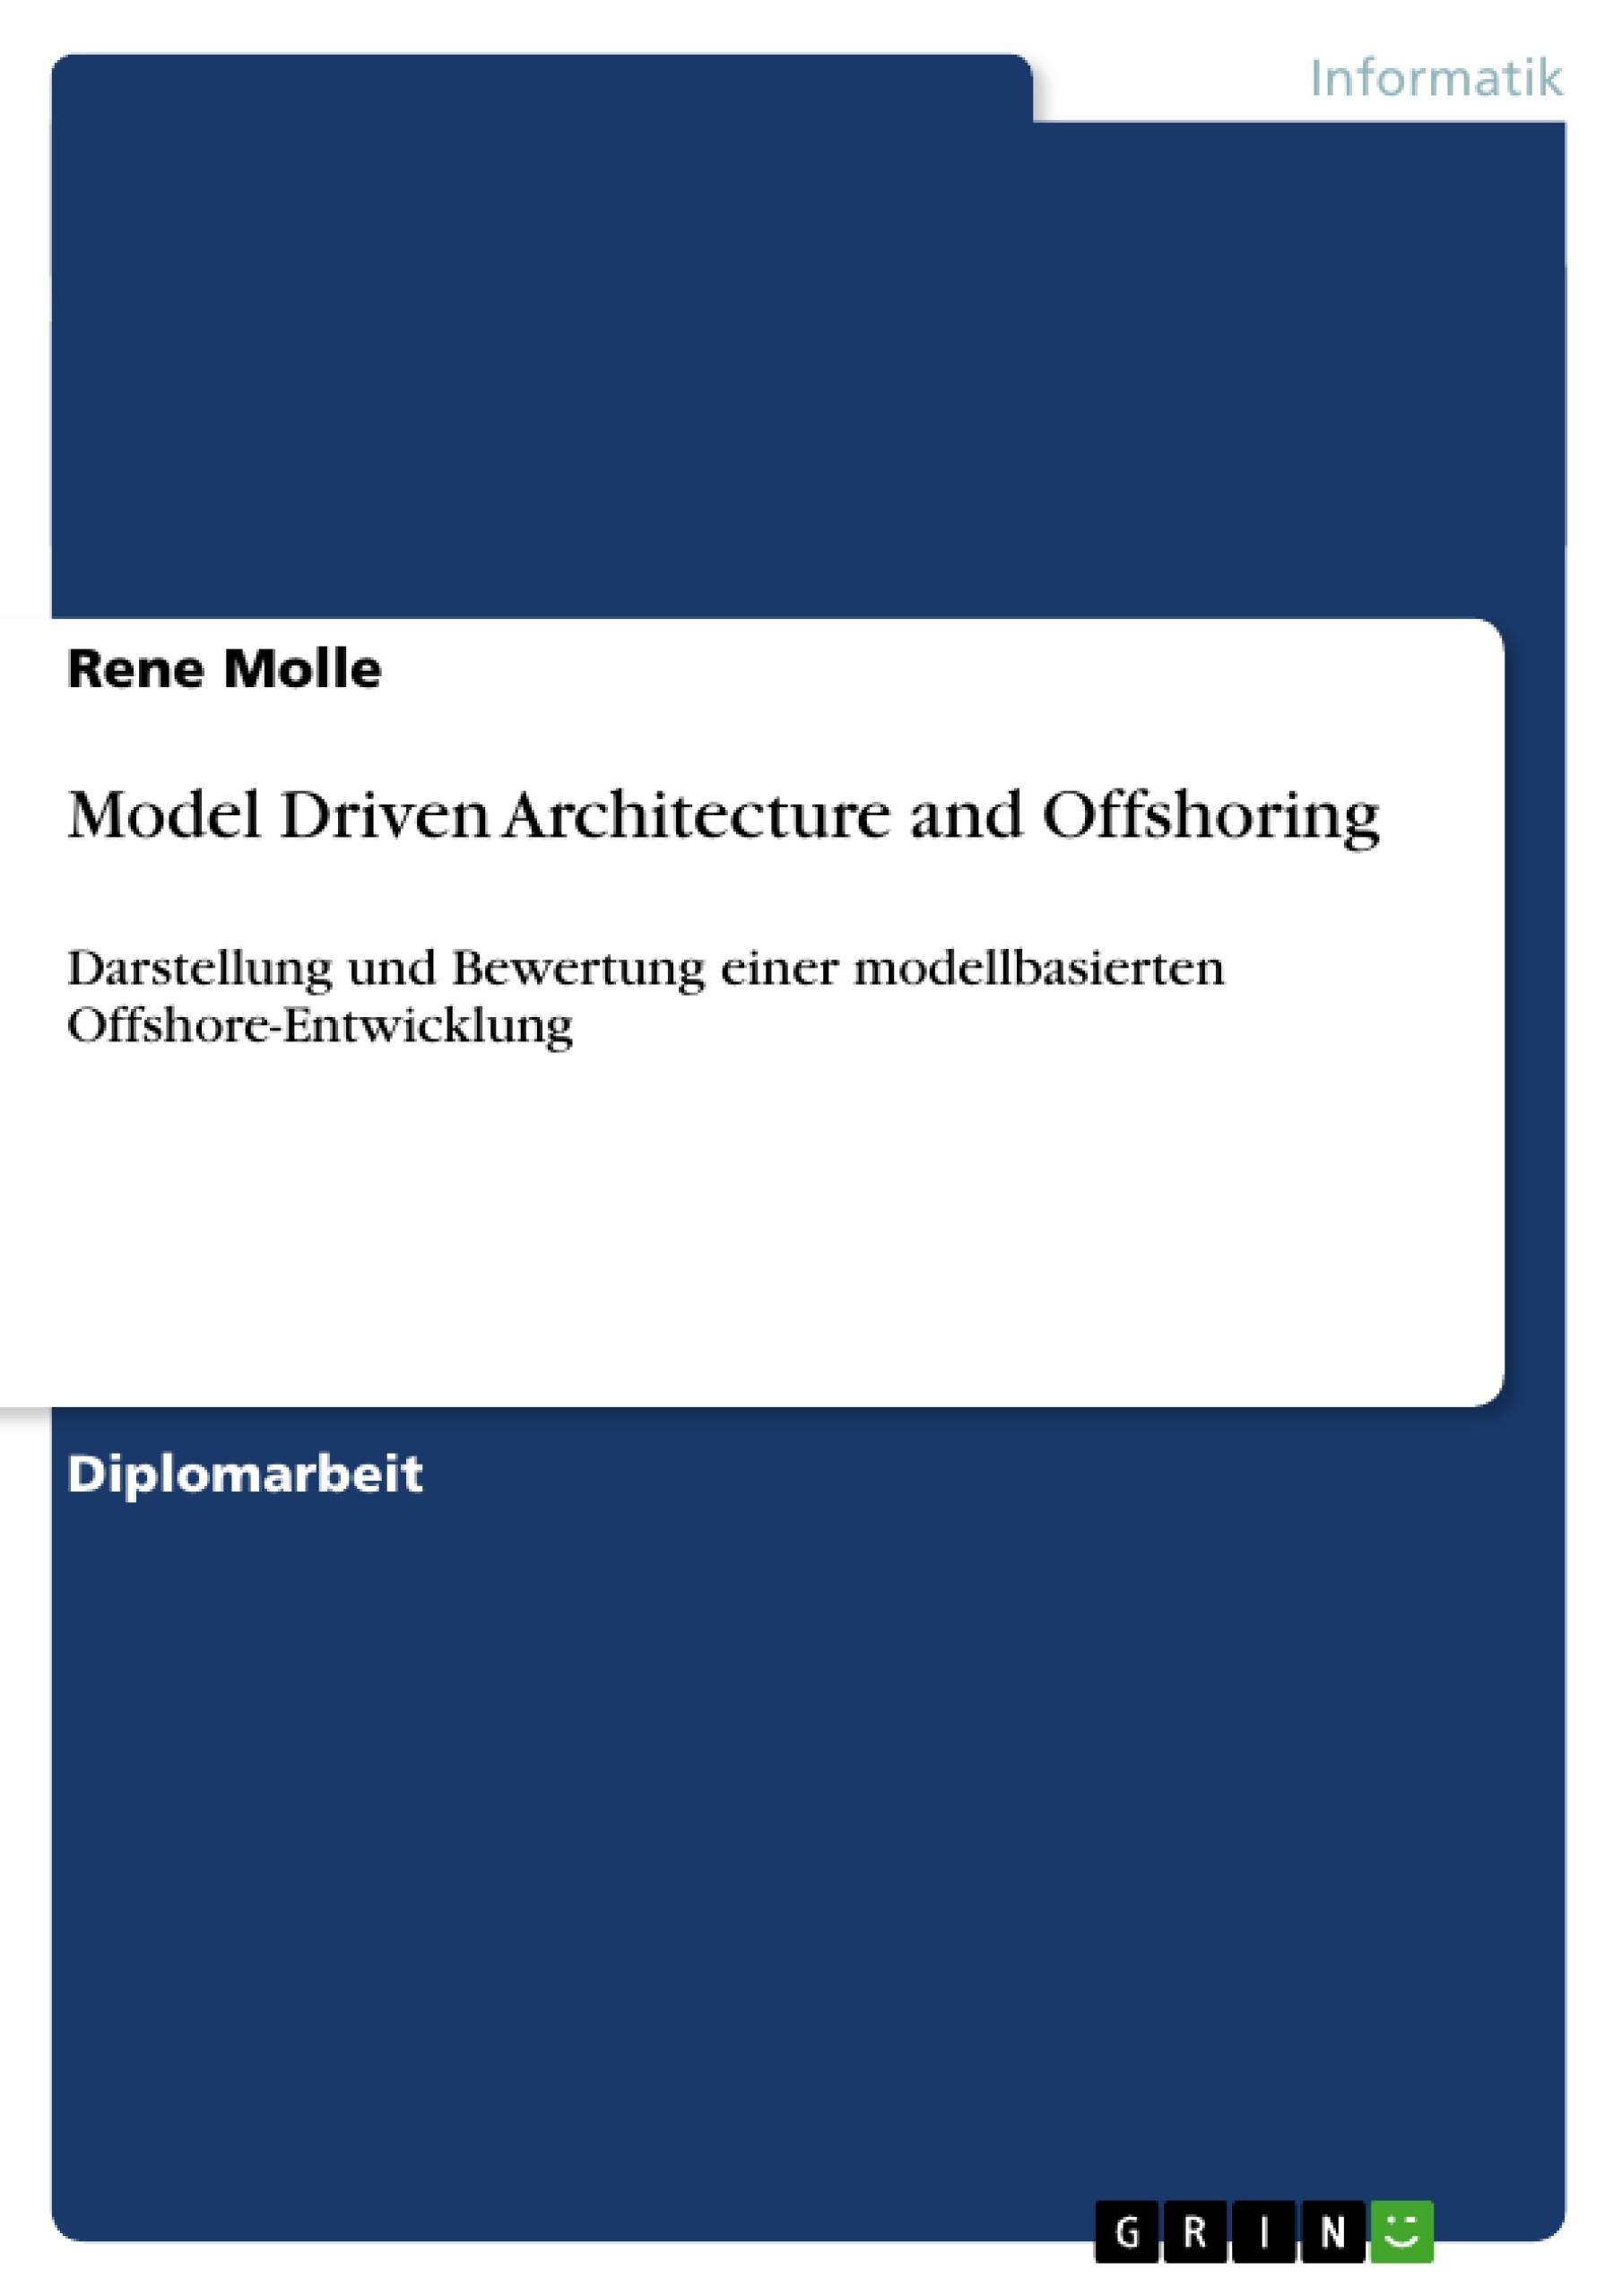 Titre: Model Driven Architecture and Offshoring